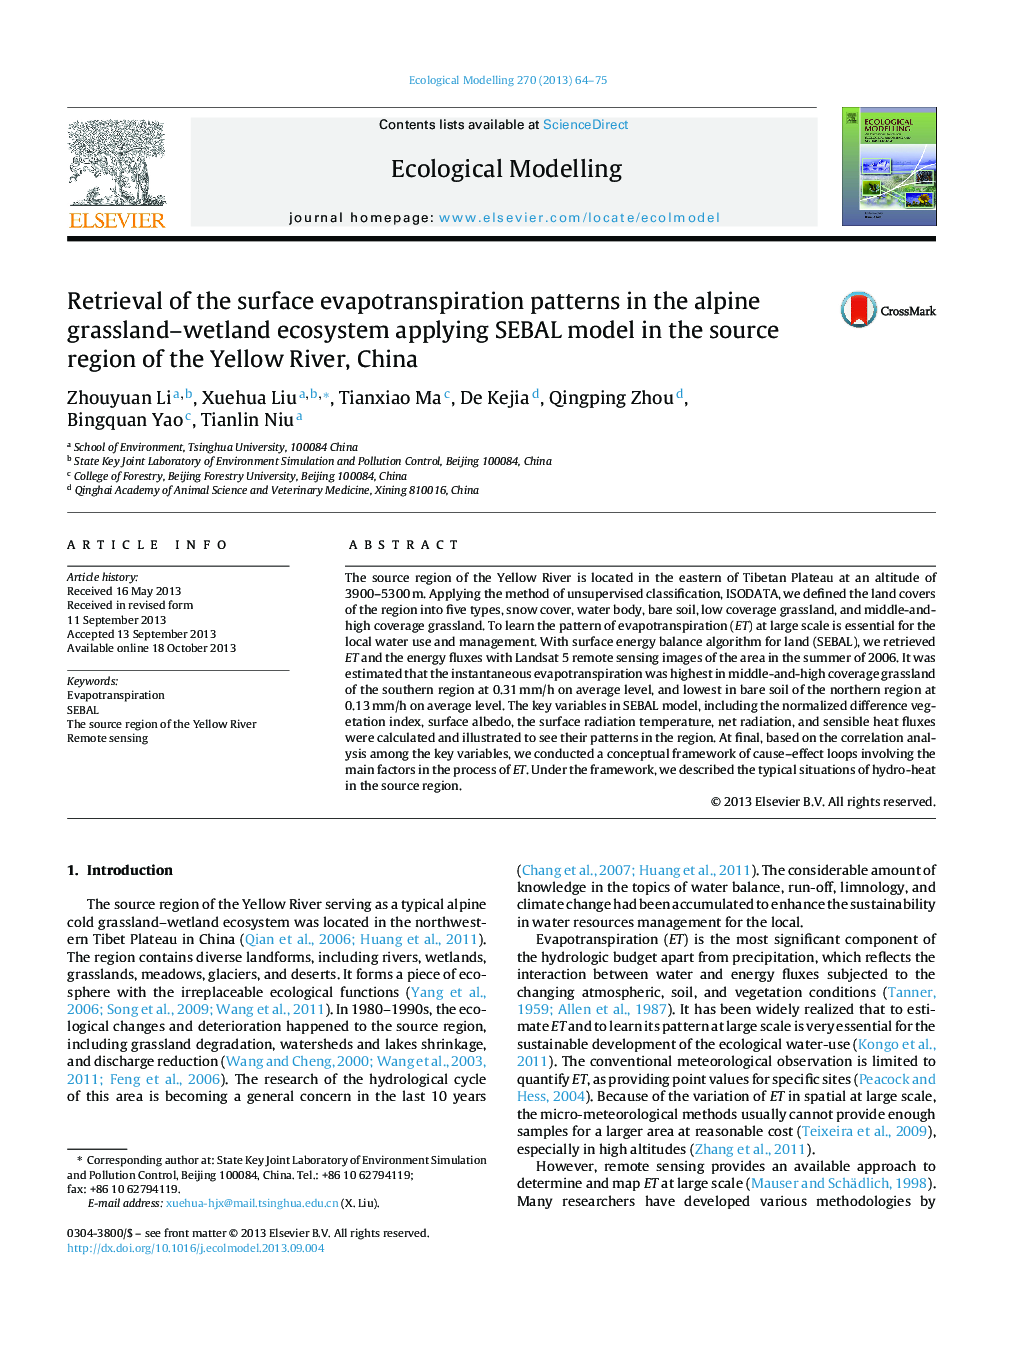 Retrieval of the surface evapotranspiration patterns in the alpine grassland–wetland ecosystem applying SEBAL model in the source region of the Yellow River, China